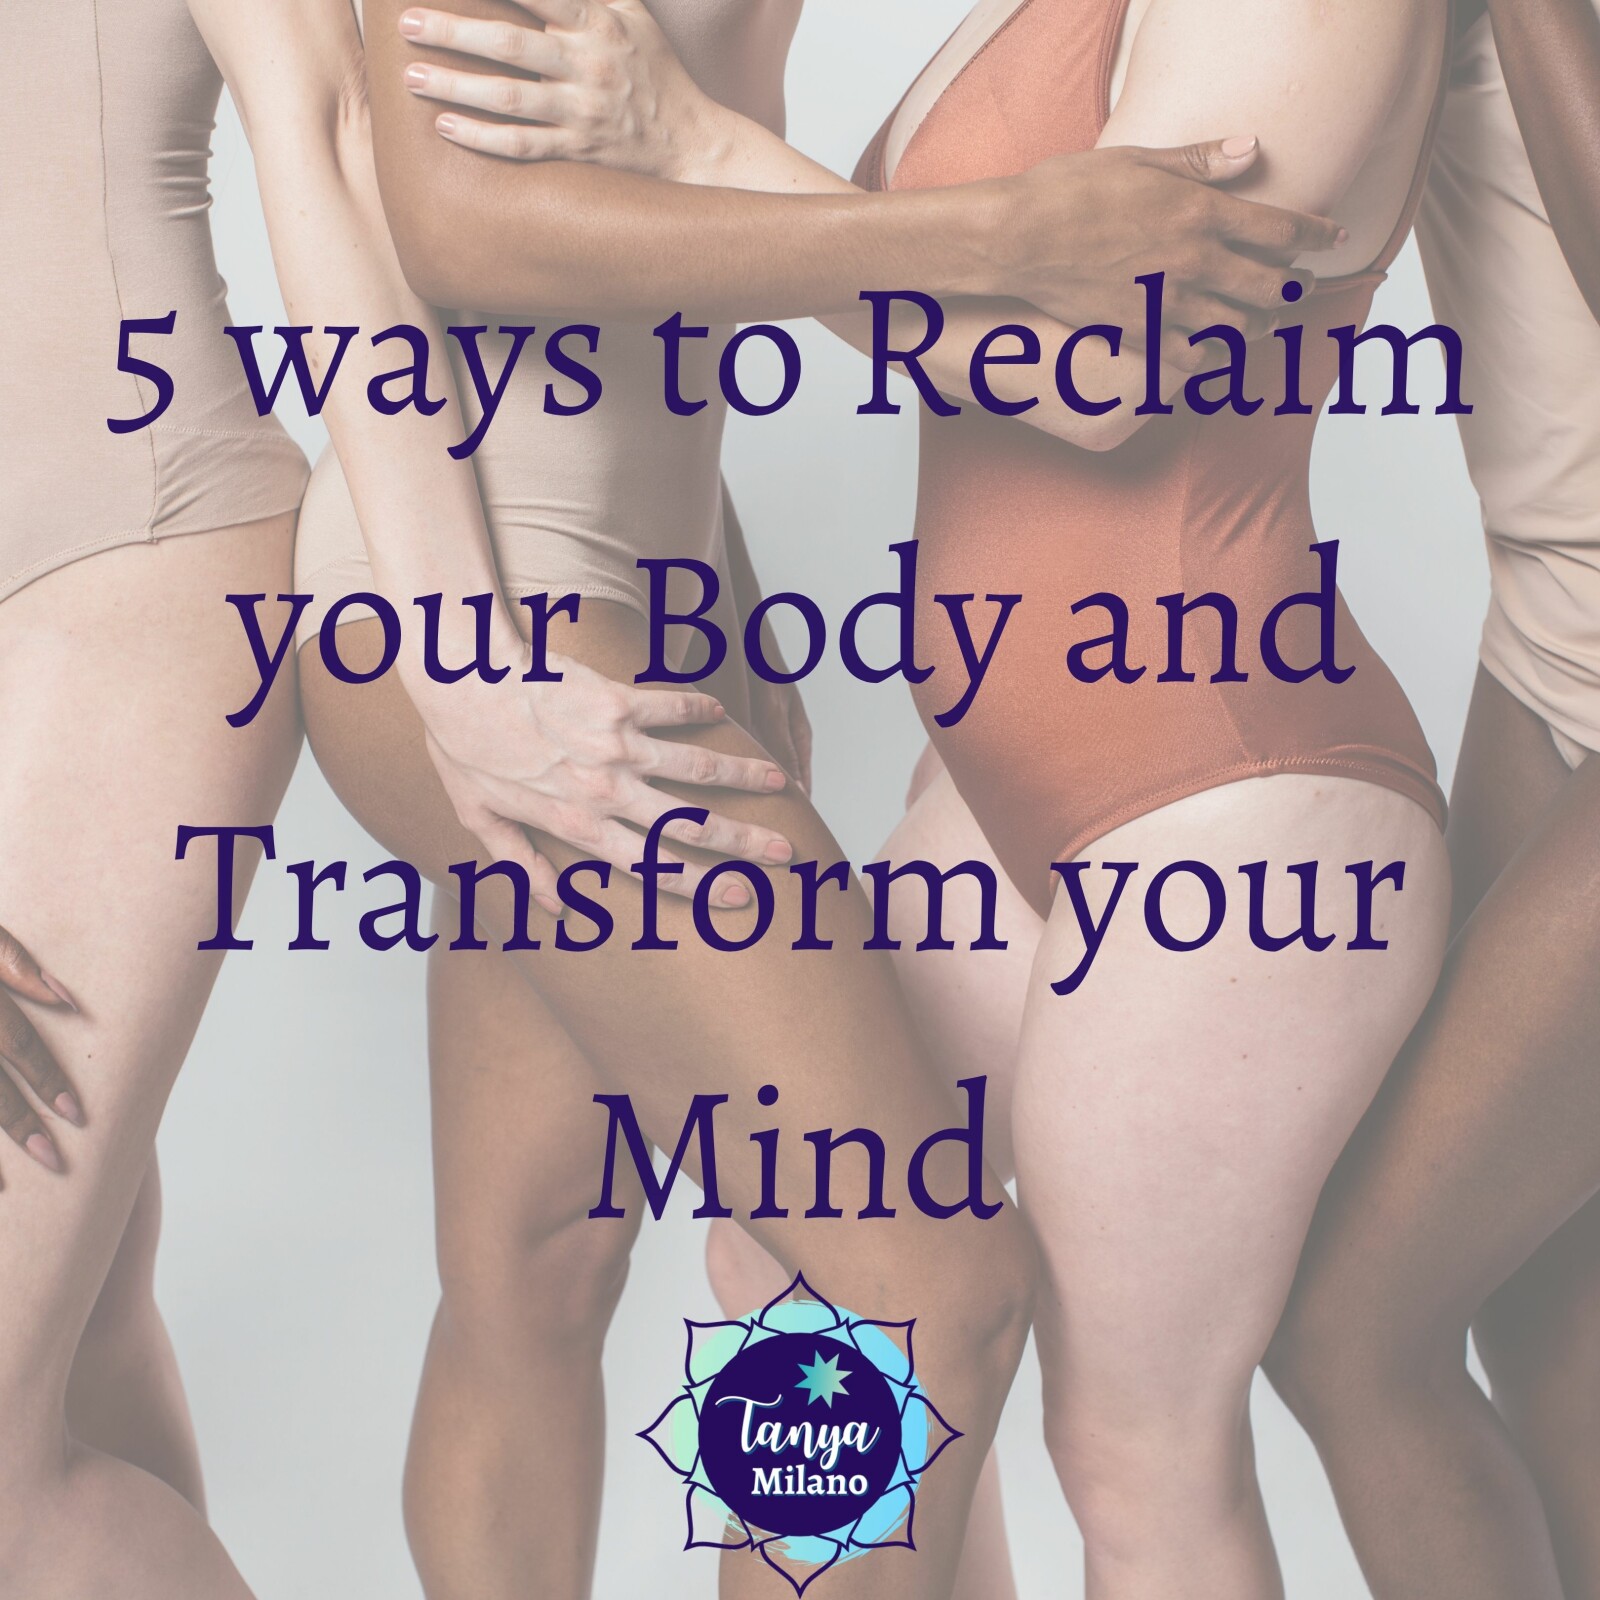 5 Ways to Reclaim your Body and Transform your Mind